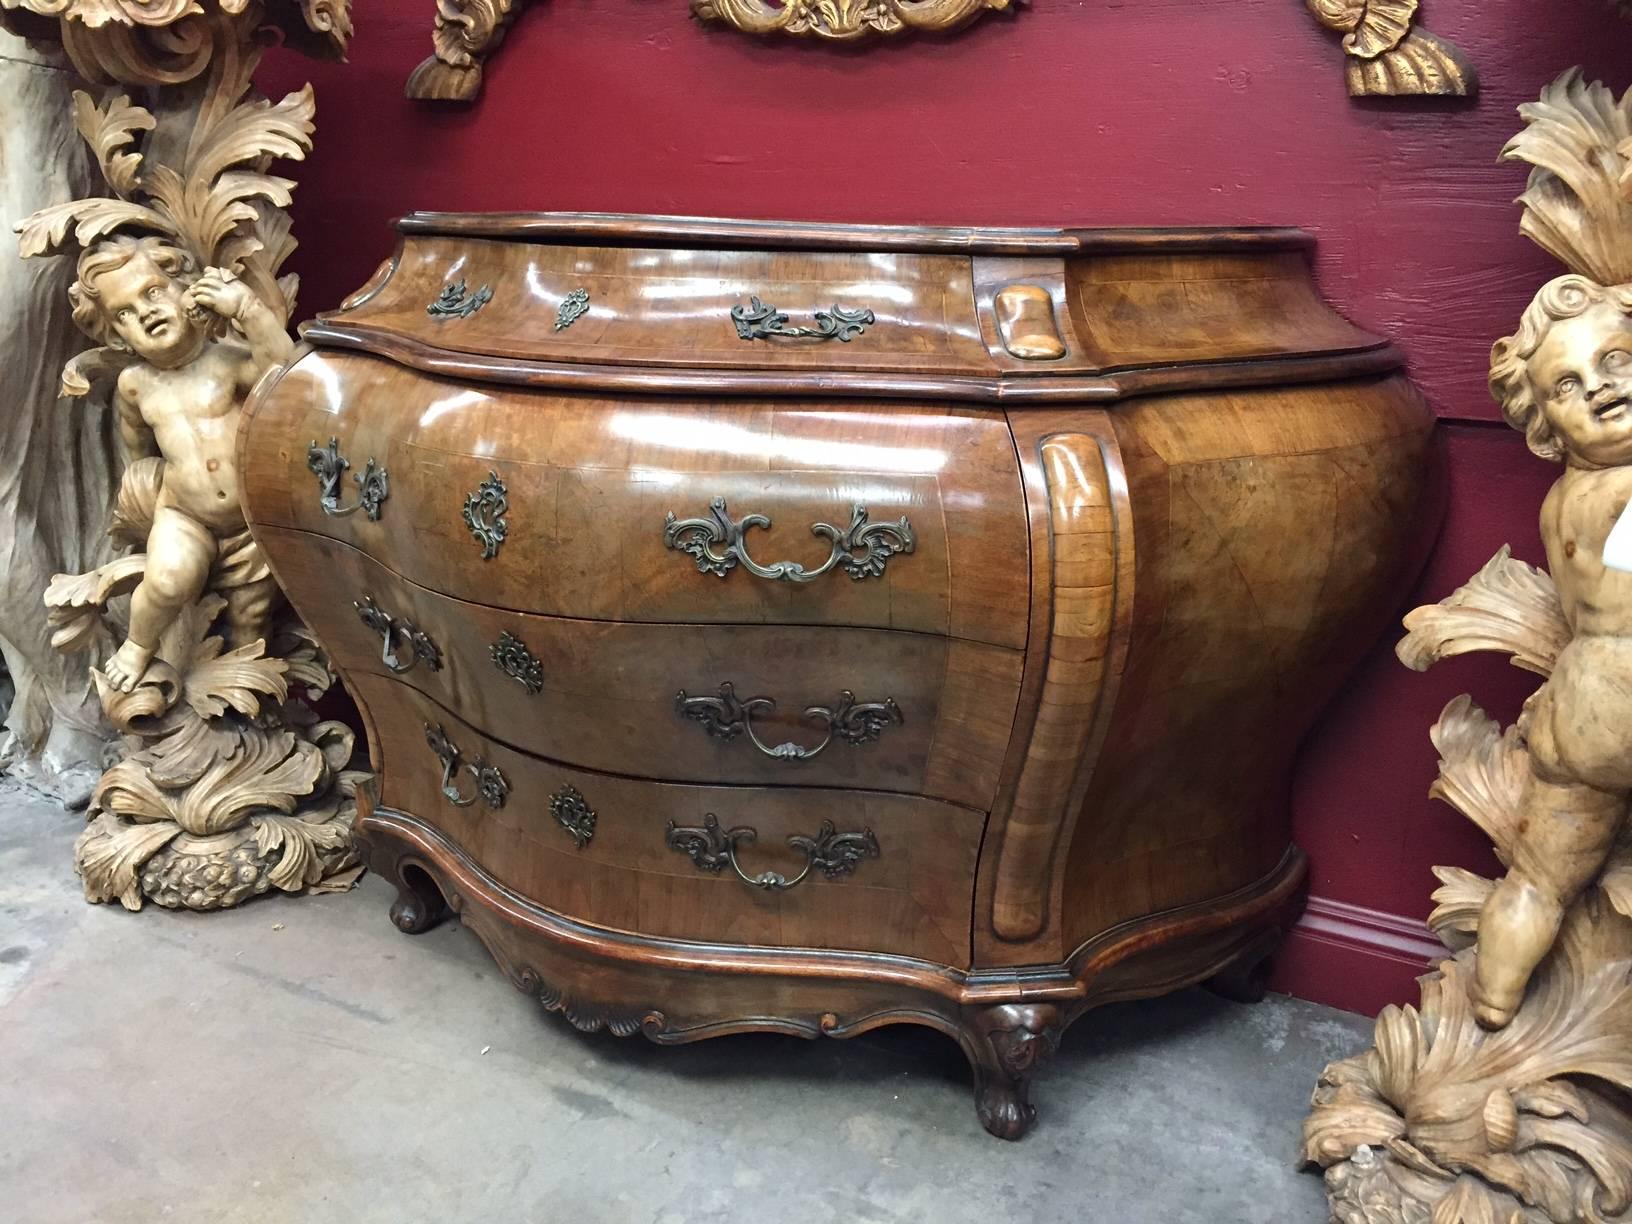 Fabulous large 19th century Italian Rococo style walnut and olivewood veneered Bombe Commode with four drawers and beautiful bronze handles on cabriole legs. Very desirable and elegant proportion.
Measures: Height 36 inches x width 54 inches x